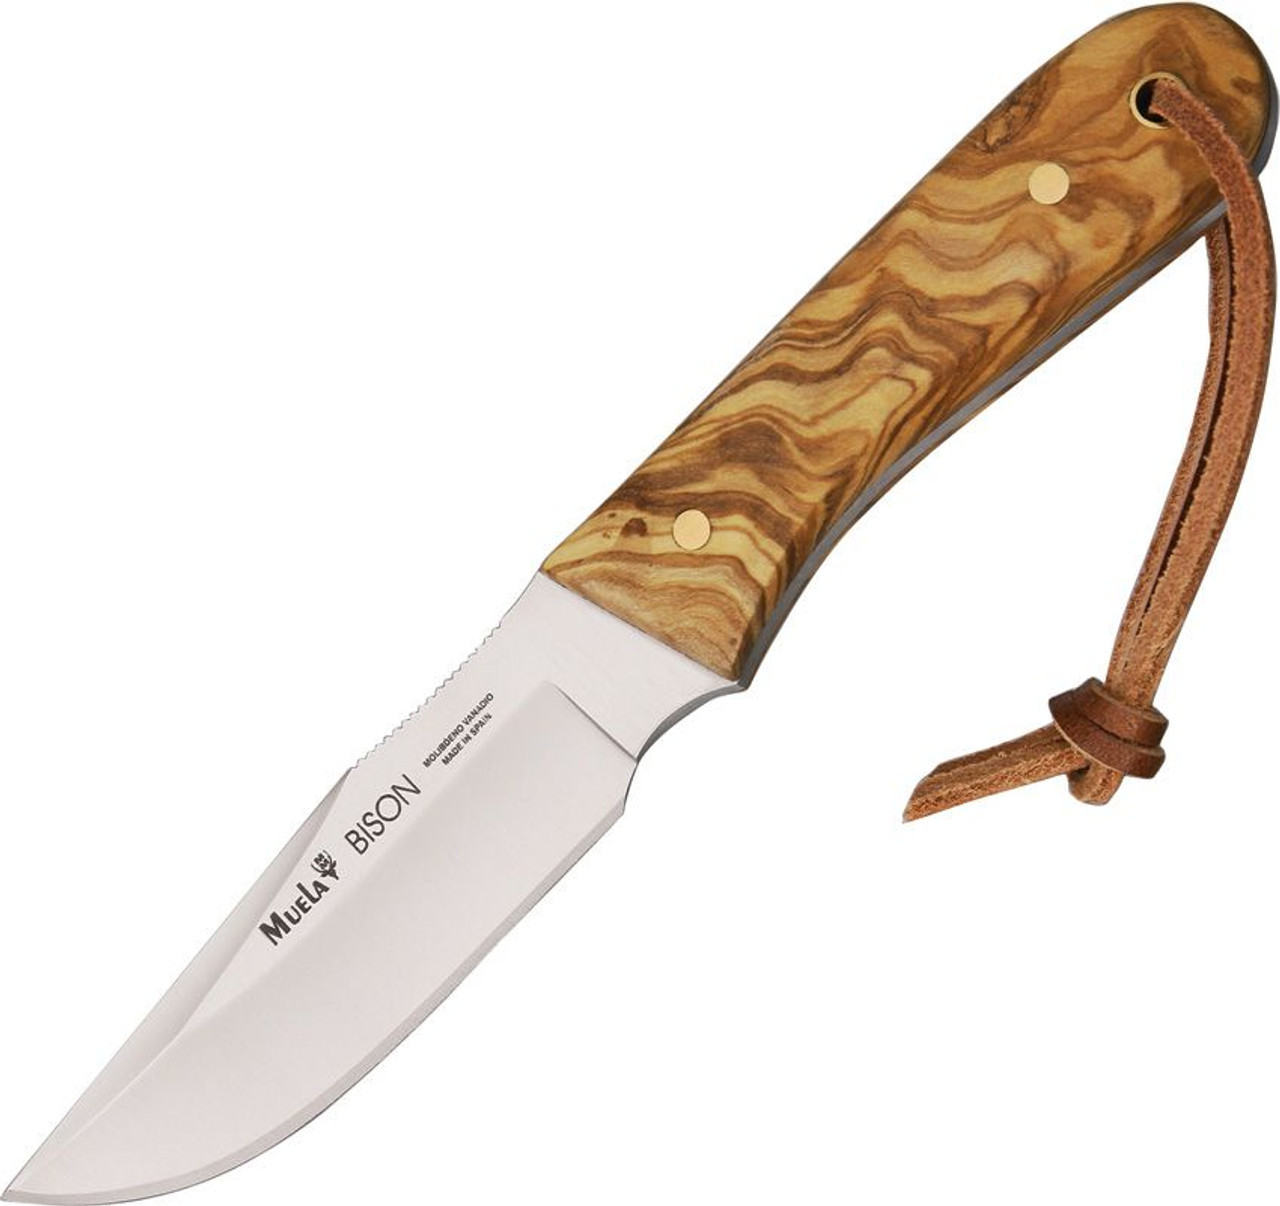 Muela Bison Fixed Blade Knife (MUE91779)- 3.50" Stainless Steel Clip Point Plain Blade, Olive Wood Handle